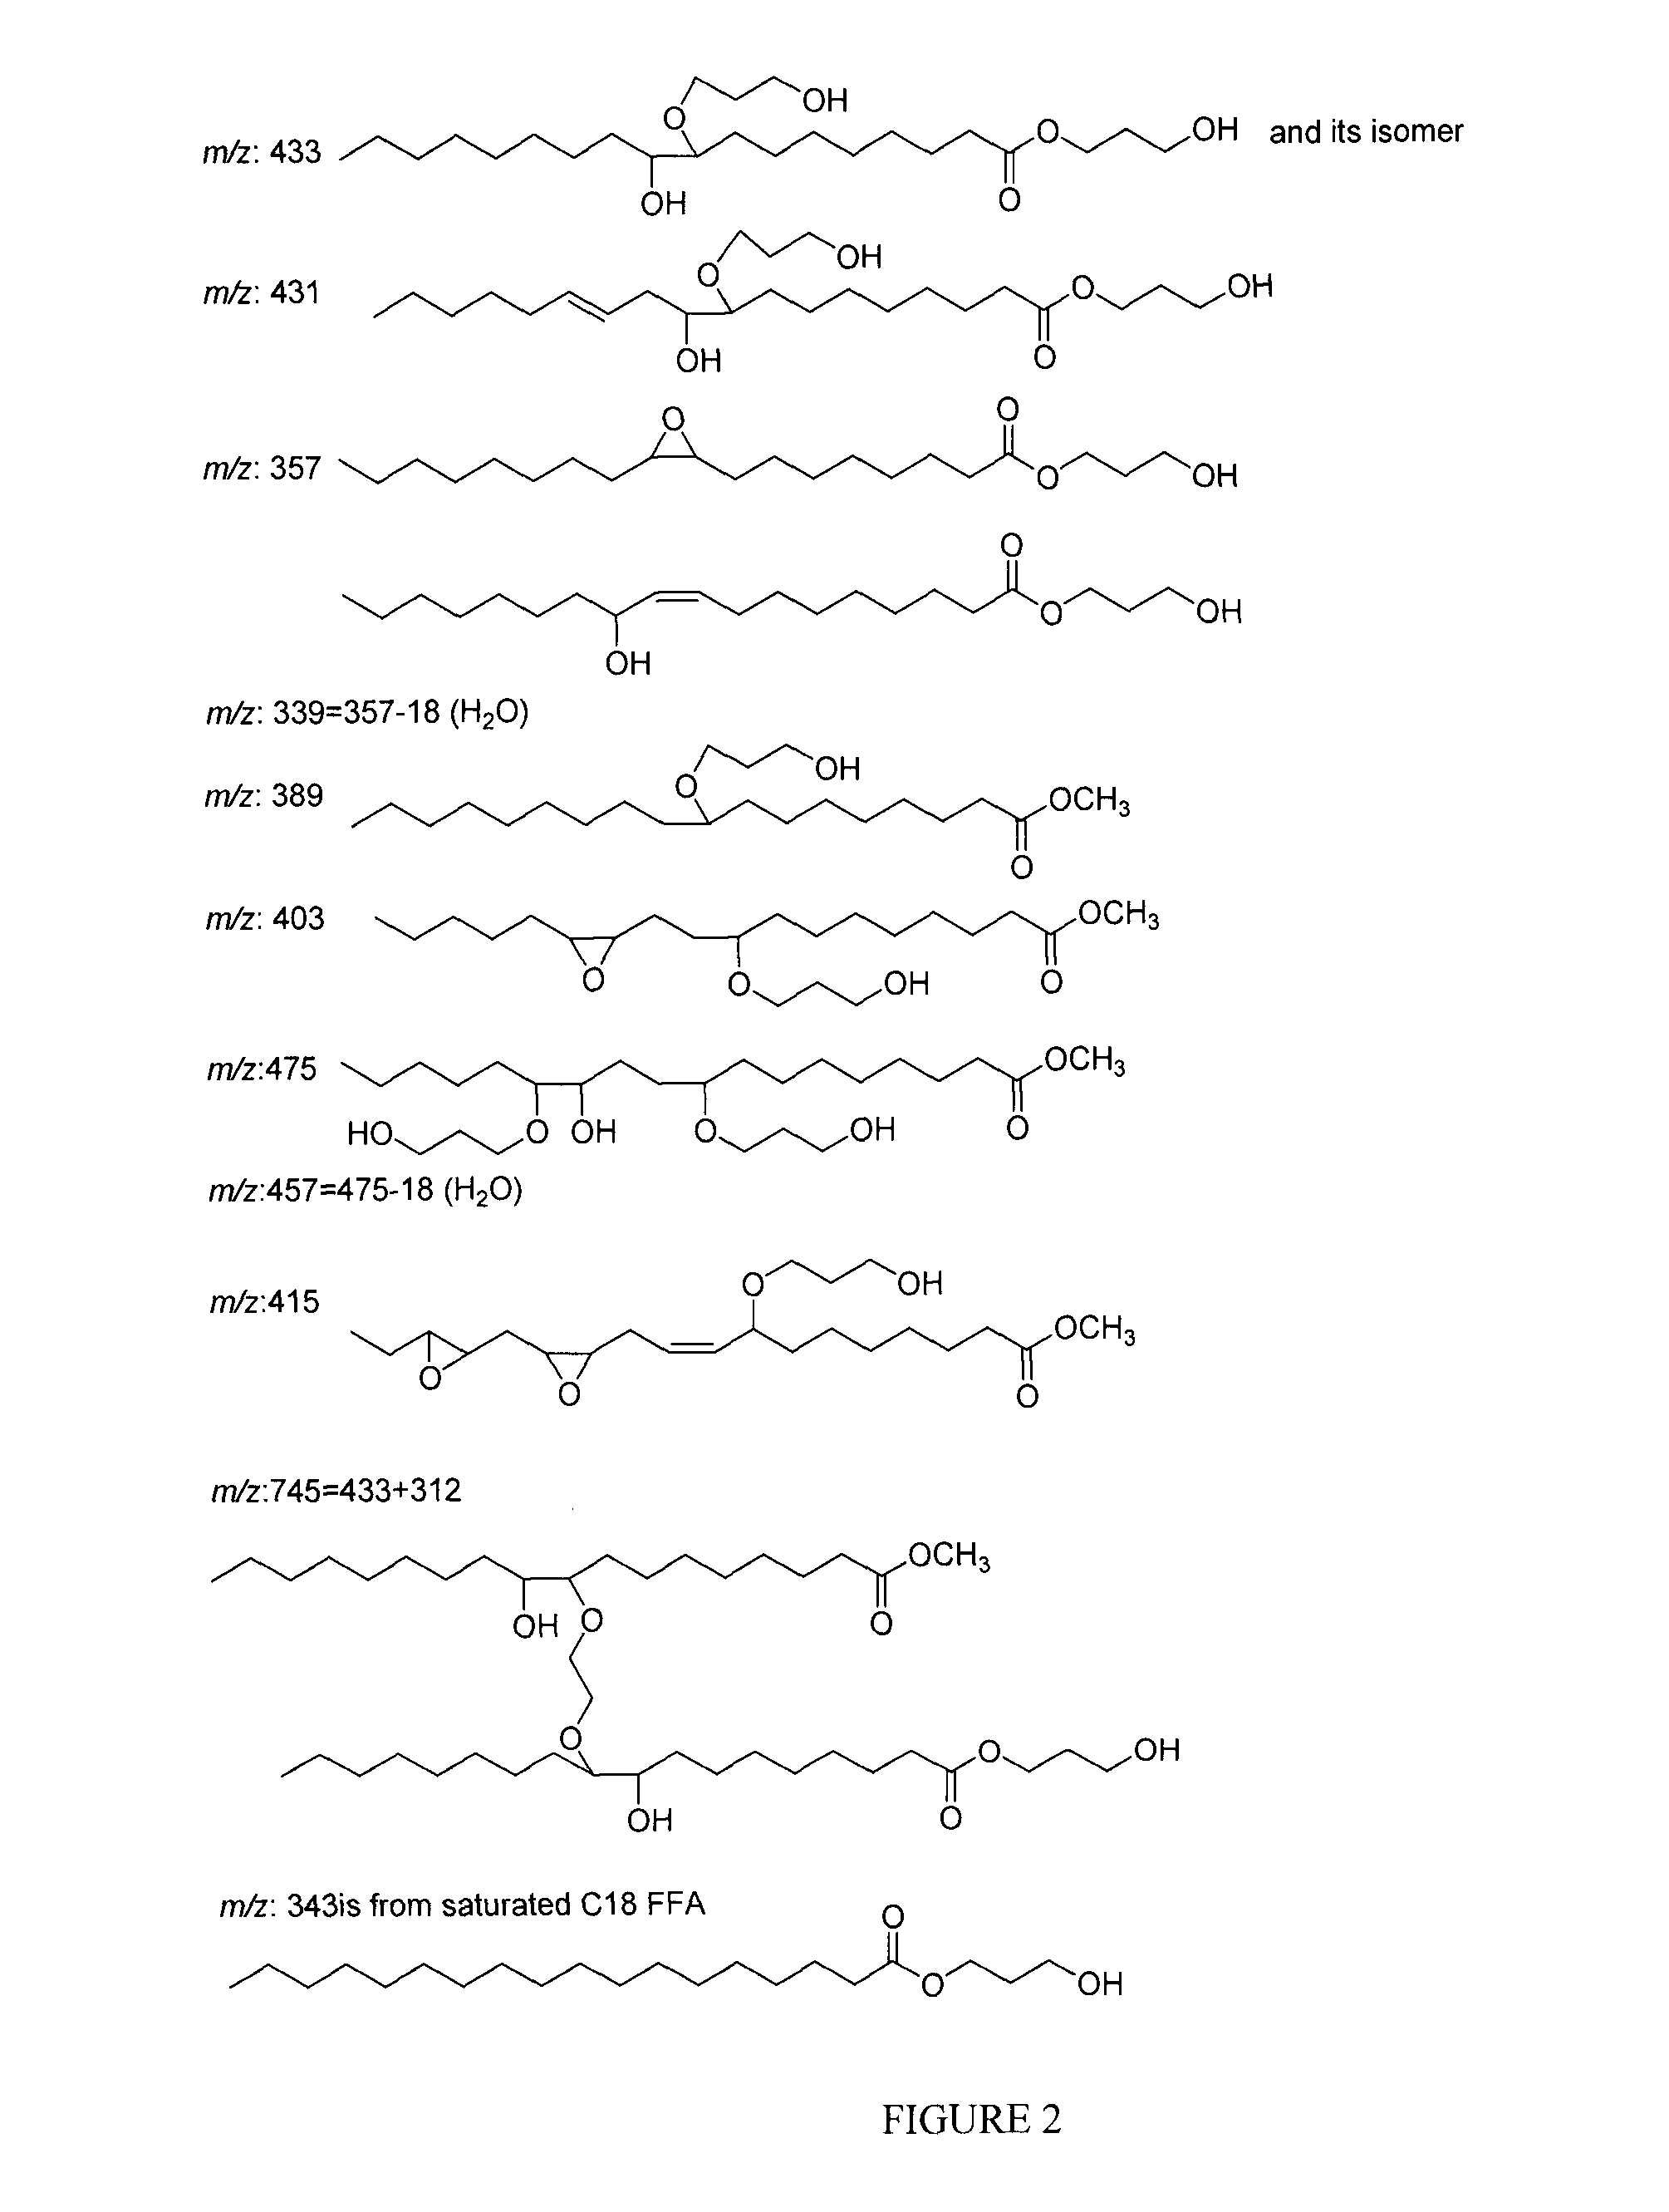 Polyol synthesis from fatty acids and oils